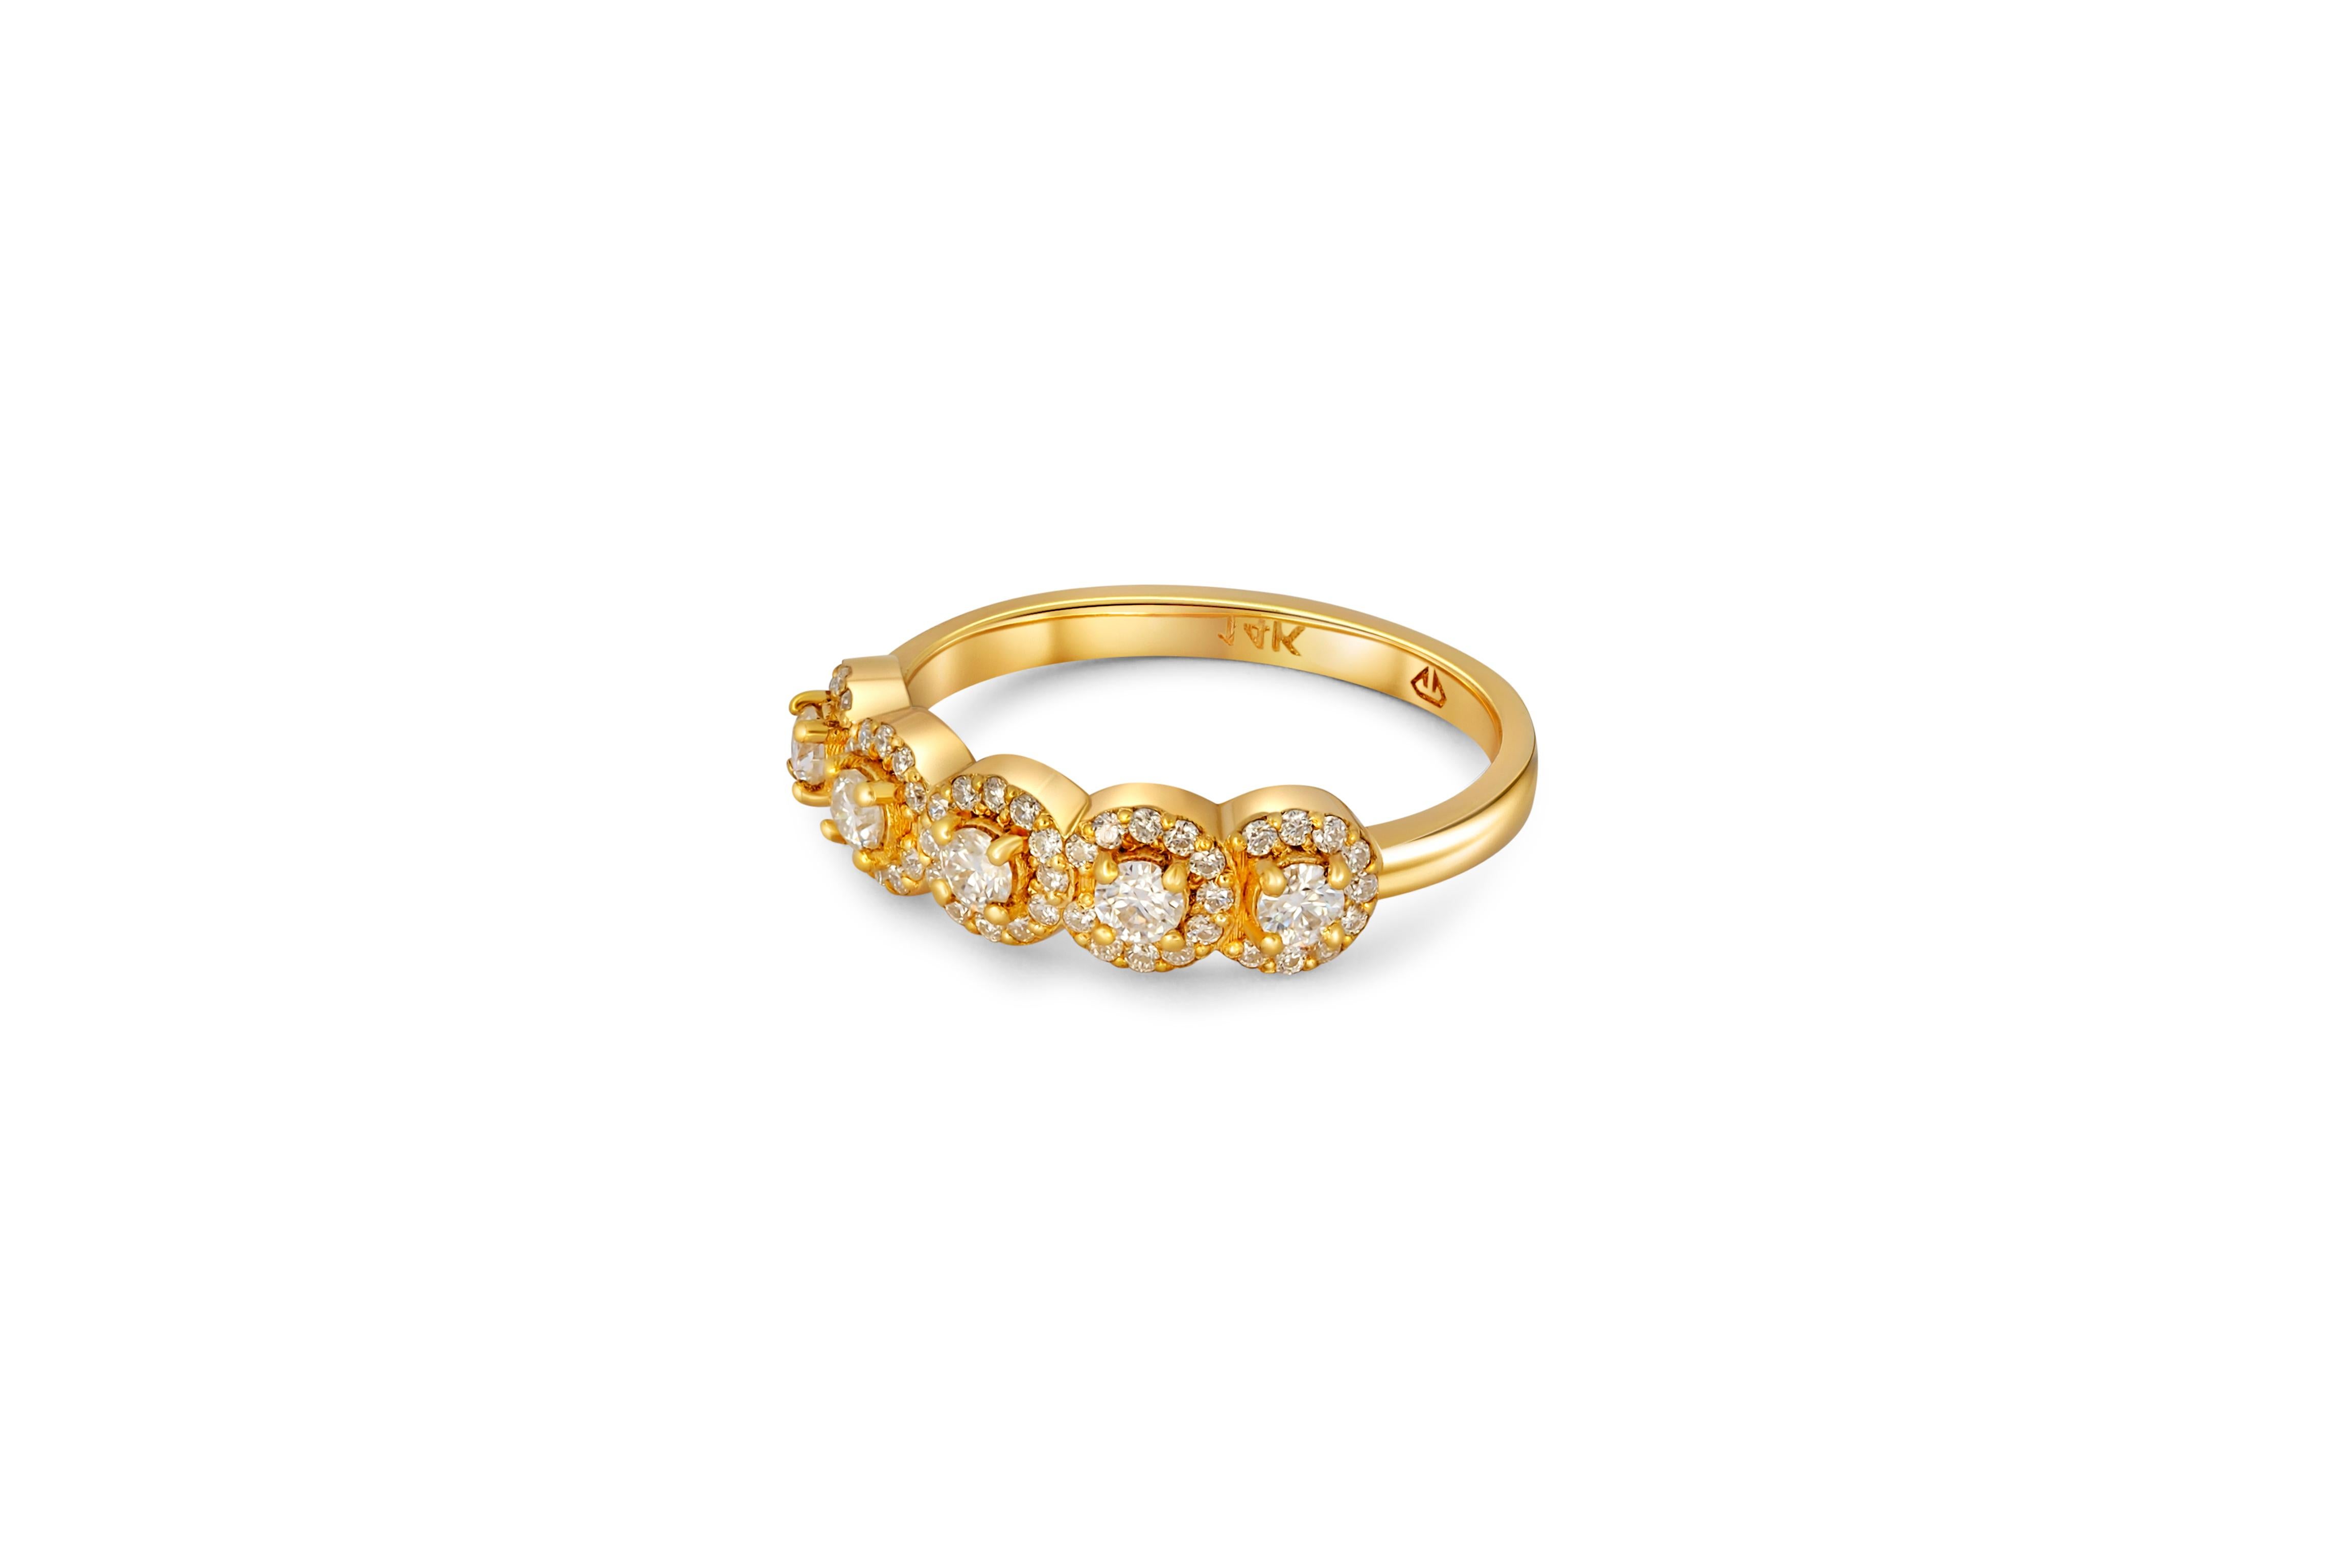 For Sale:  Five-Stone Halo Wedding Band in 14k gold. 7